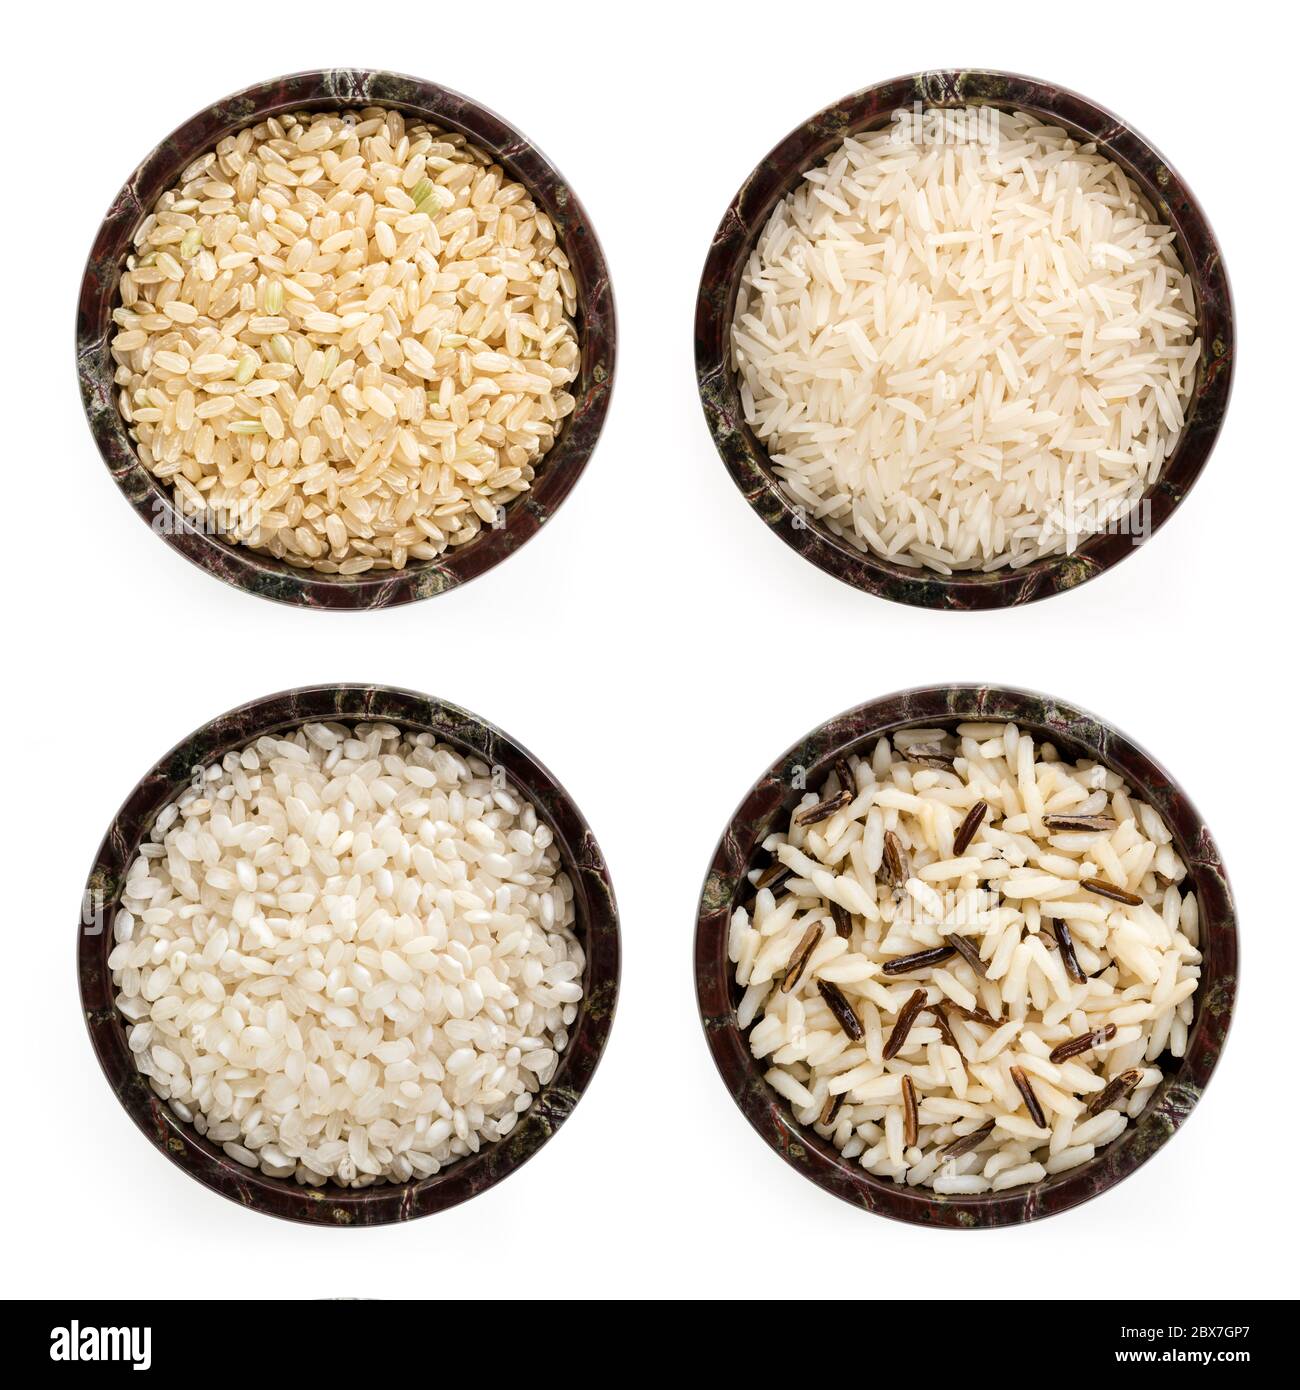 Rice varieties in stone bowls.  Top view, isolated.  Includes arborio, basmati, brown, long grain and wild. Stock Photo